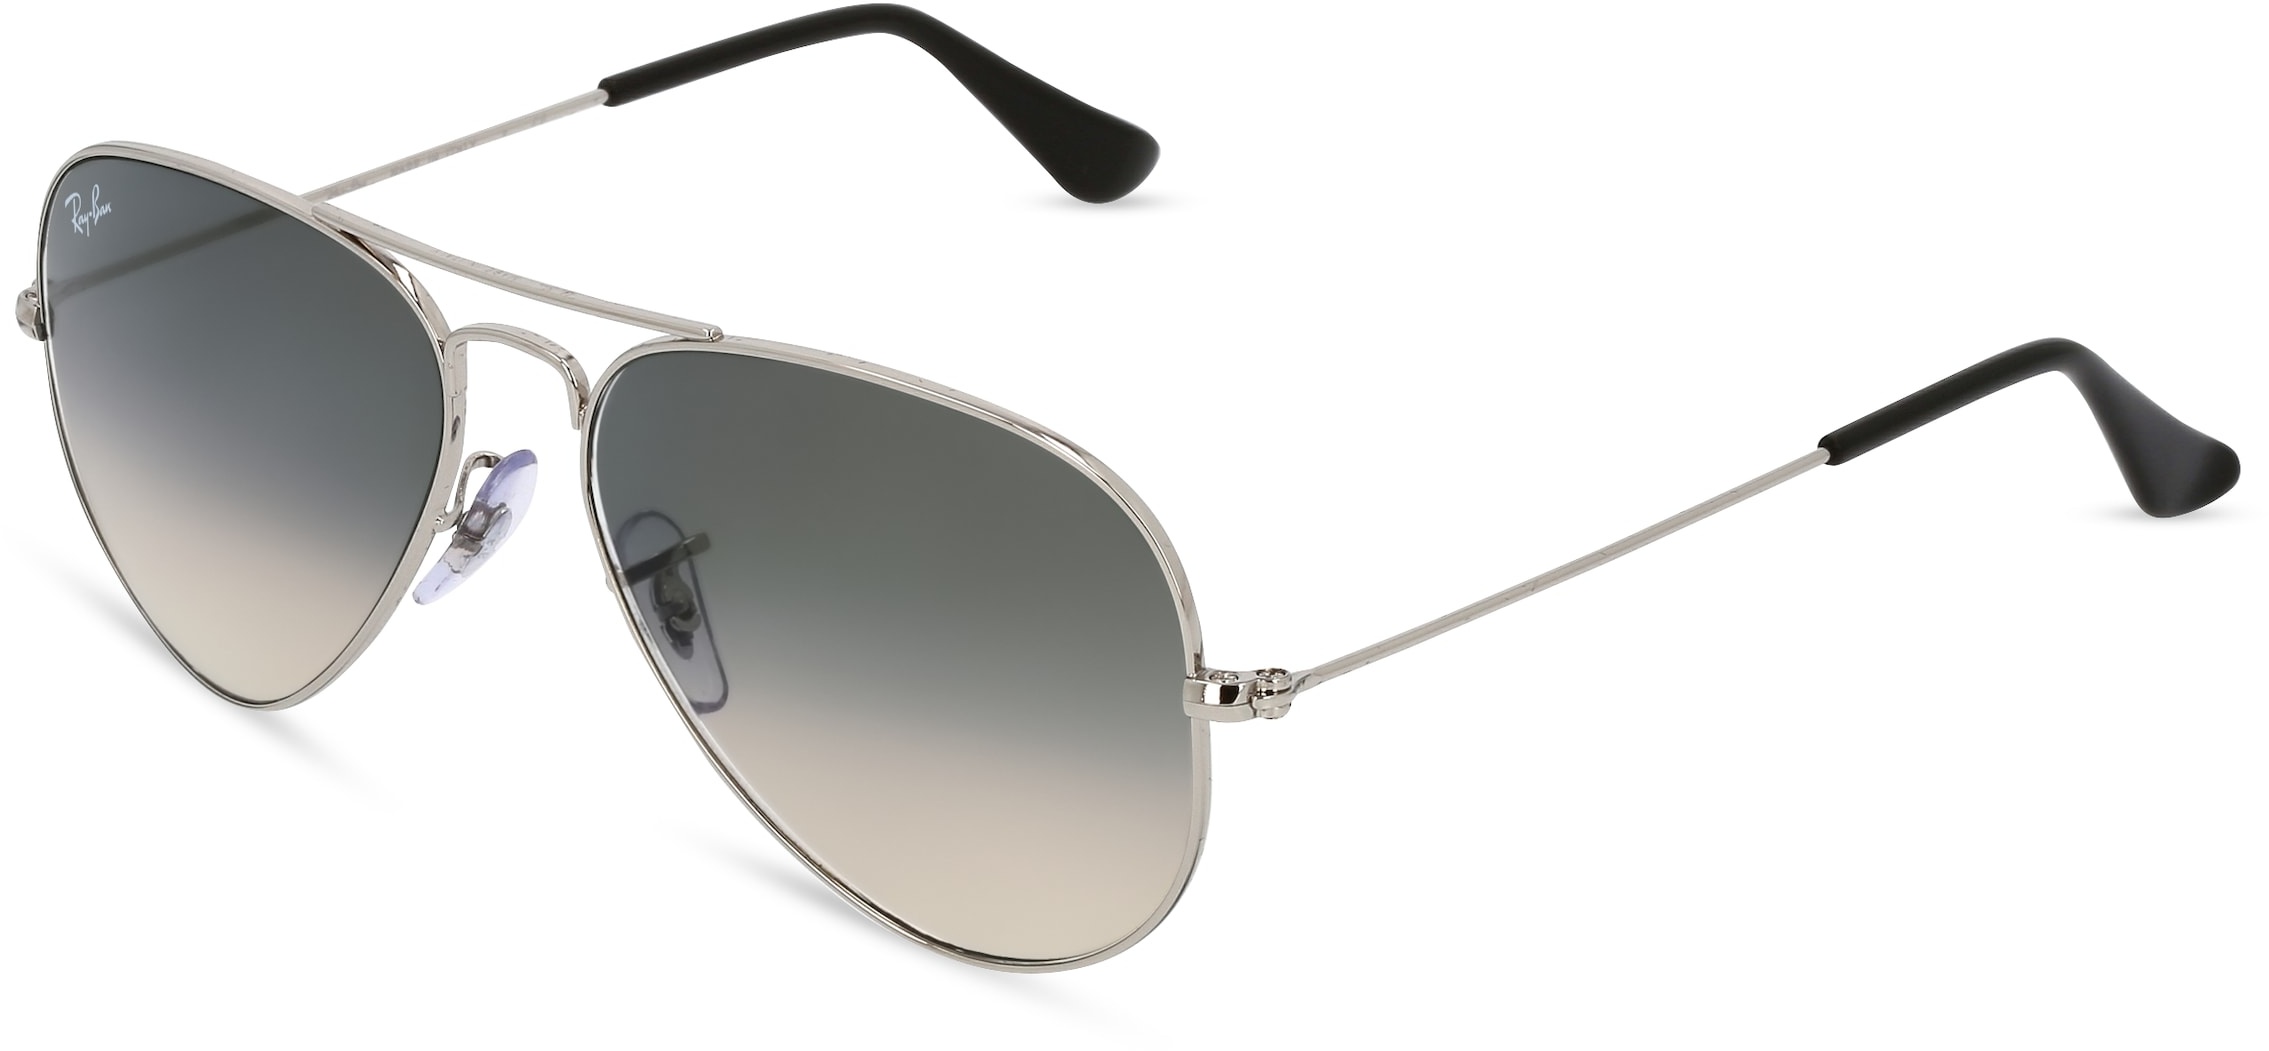 Ray-Ban RB 3025 AVIATOR LARGE METAL Unisex-Sonnenbrille Vollrand Pilot Metall-Gestell, silber